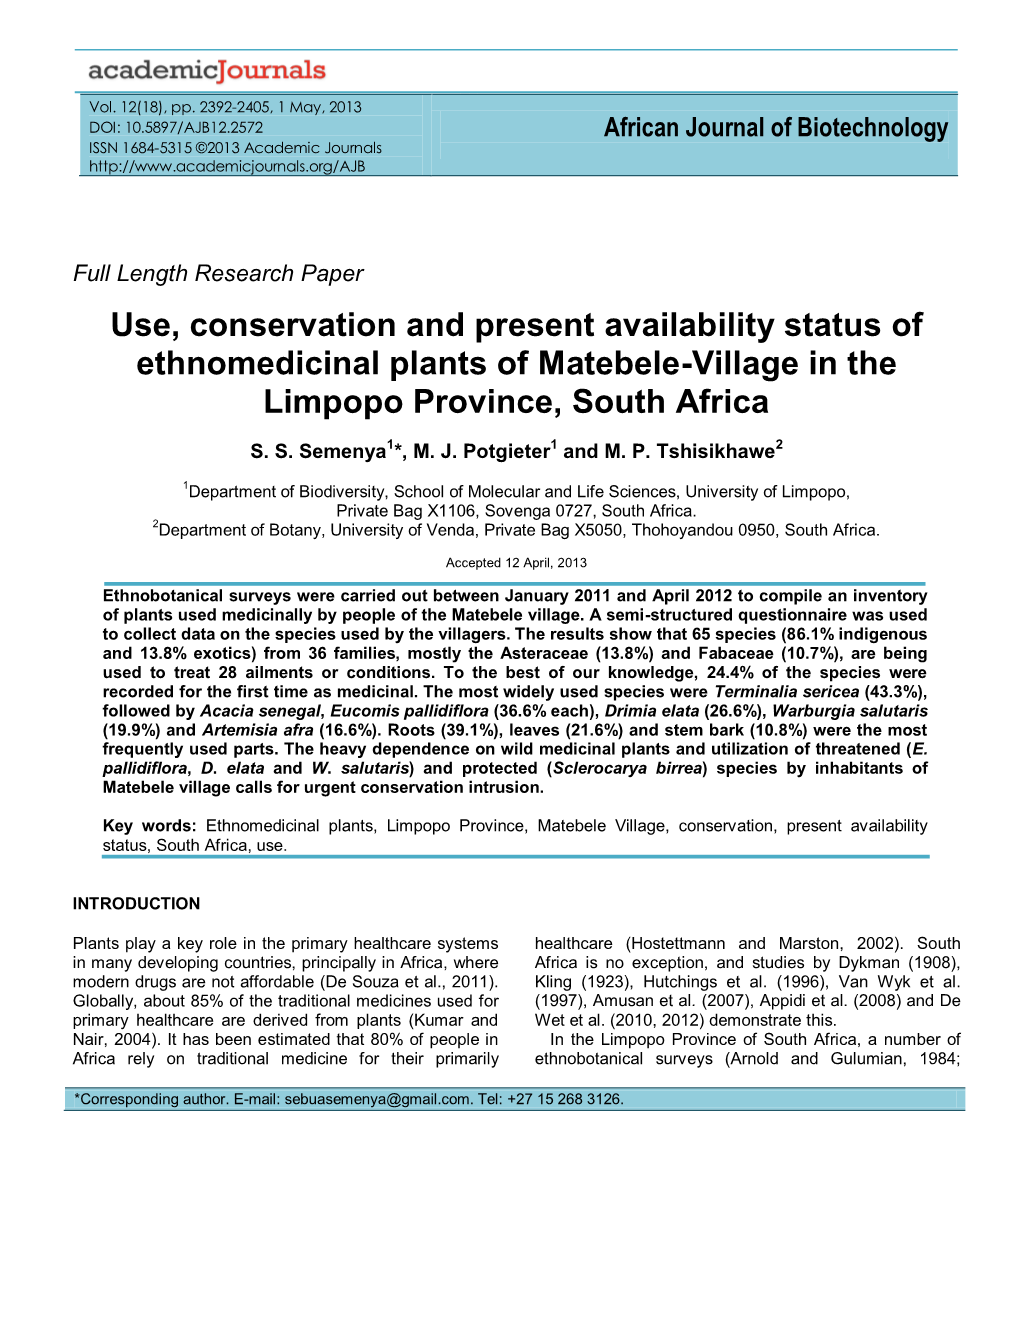 Use, Conservation and Present Availability Status of Ethnomedicinal Plants of Matebele-Village in the Limpopo Province, South Africa